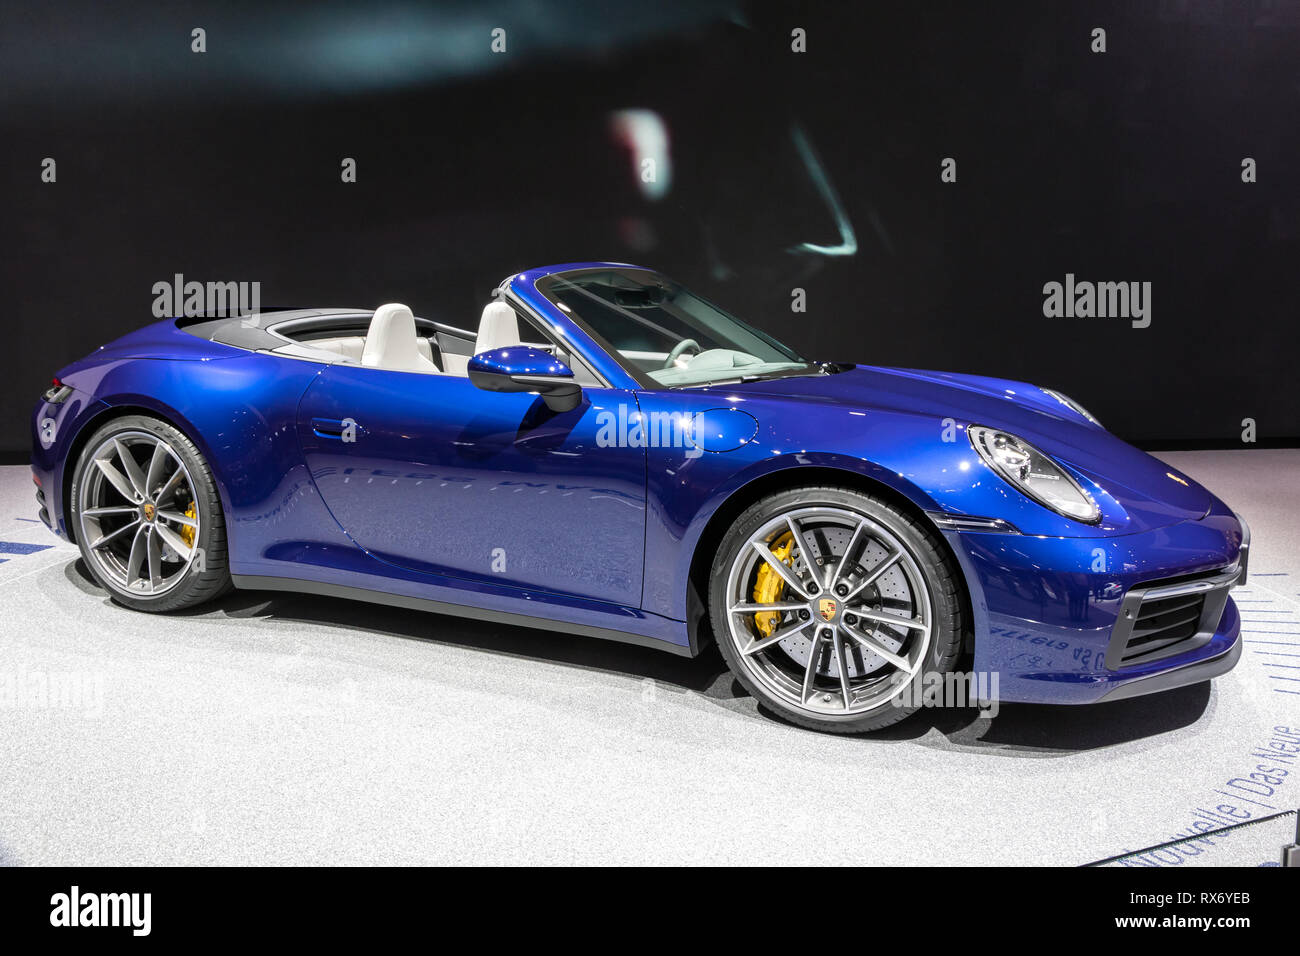 Porsche Carrera 911 Blue High Resolution Stock Photography and Images -  Alamy